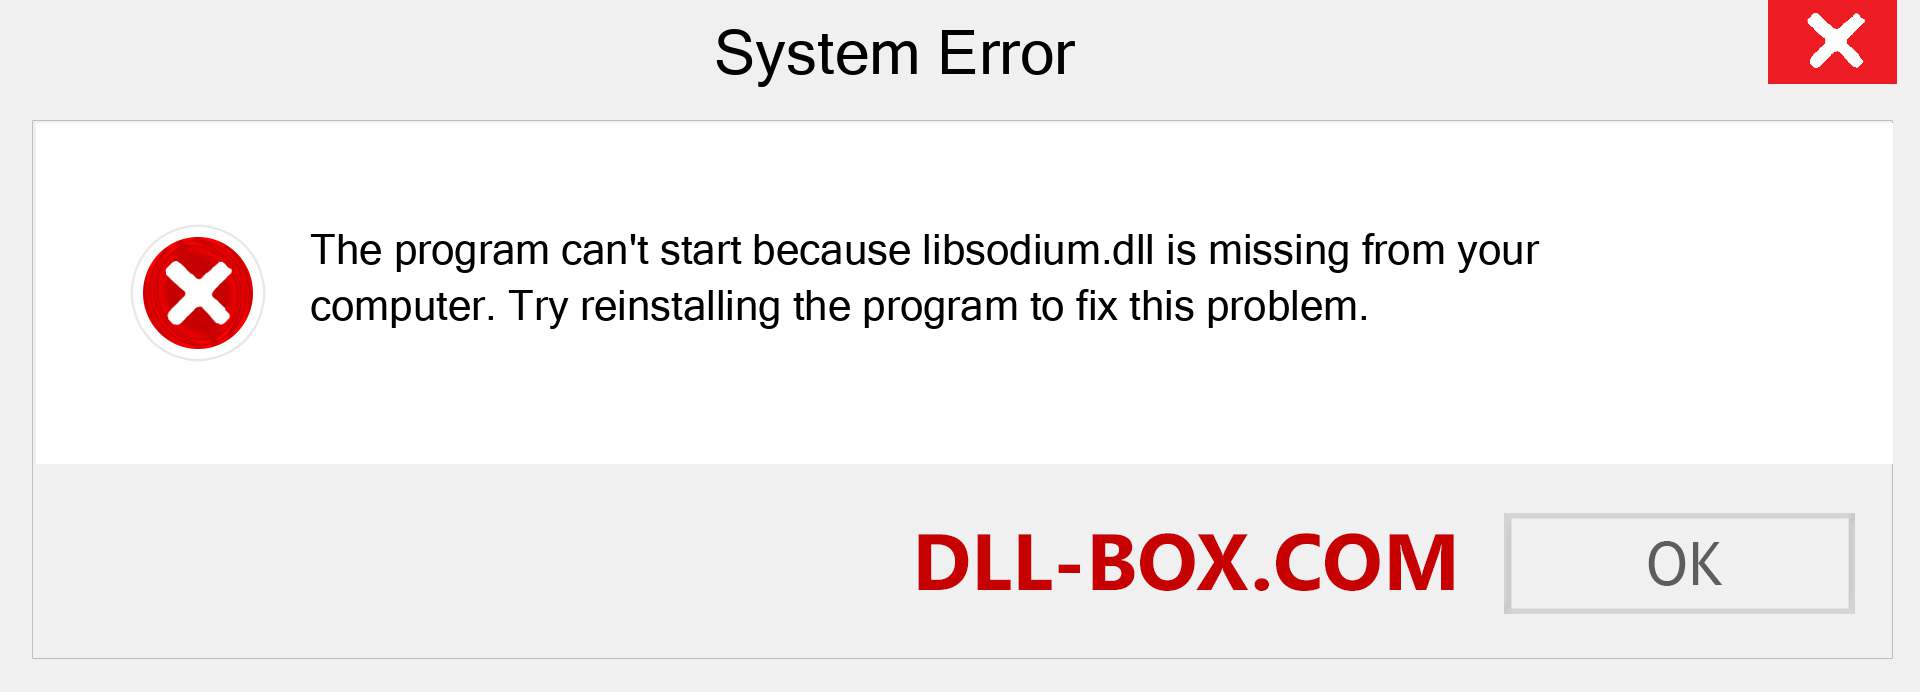  libsodium.dll file is missing?. Download for Windows 7, 8, 10 - Fix  libsodium dll Missing Error on Windows, photos, images